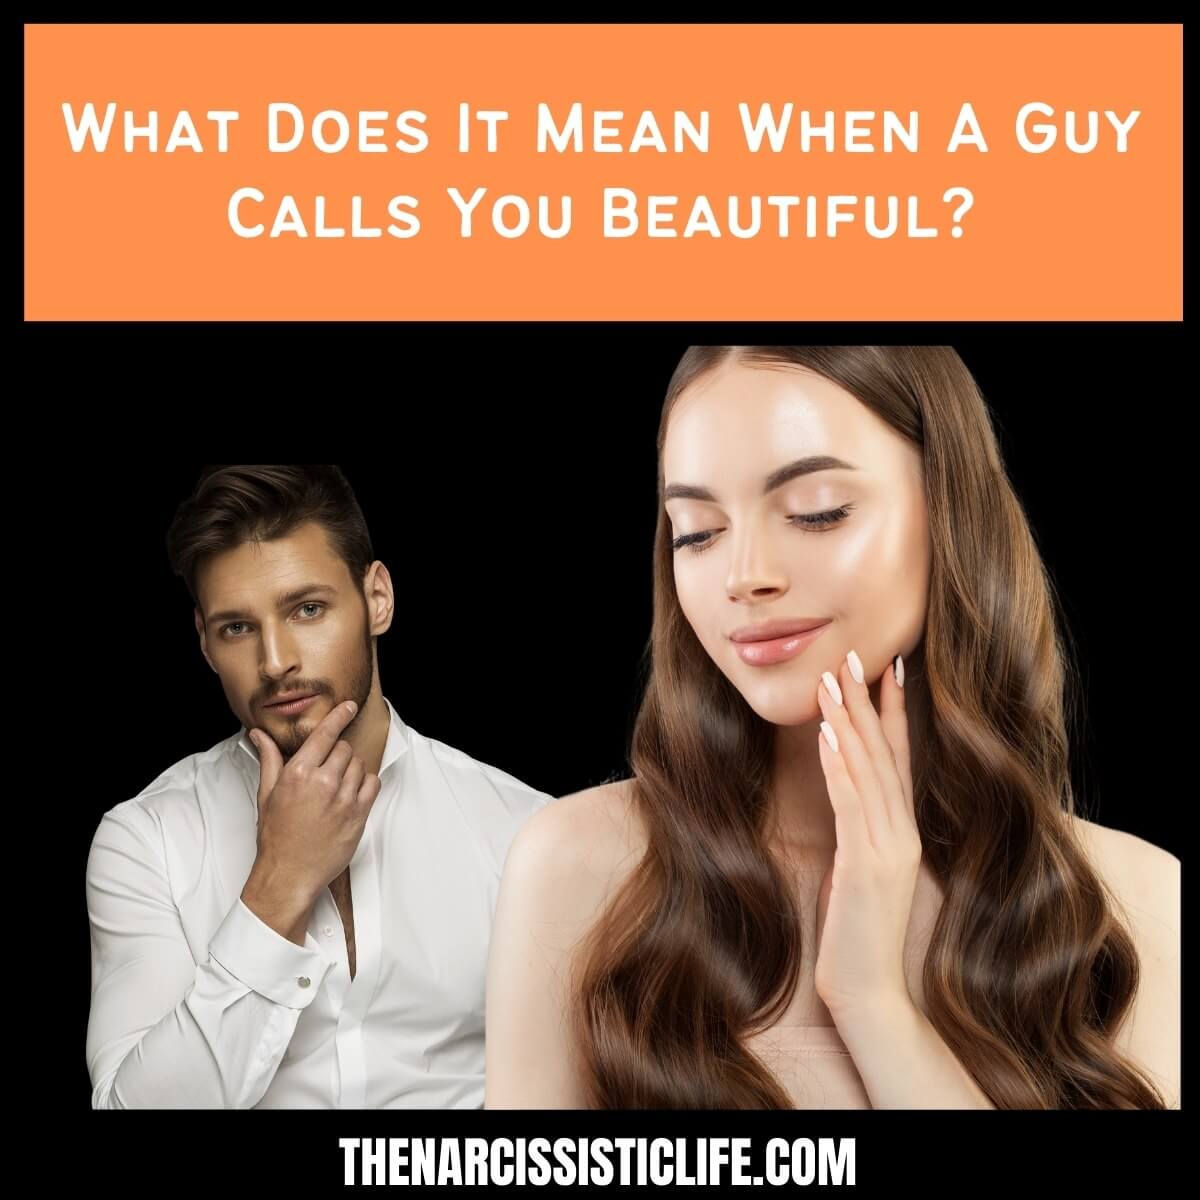 What Does It Mean When A Guy Calls You Beautiful